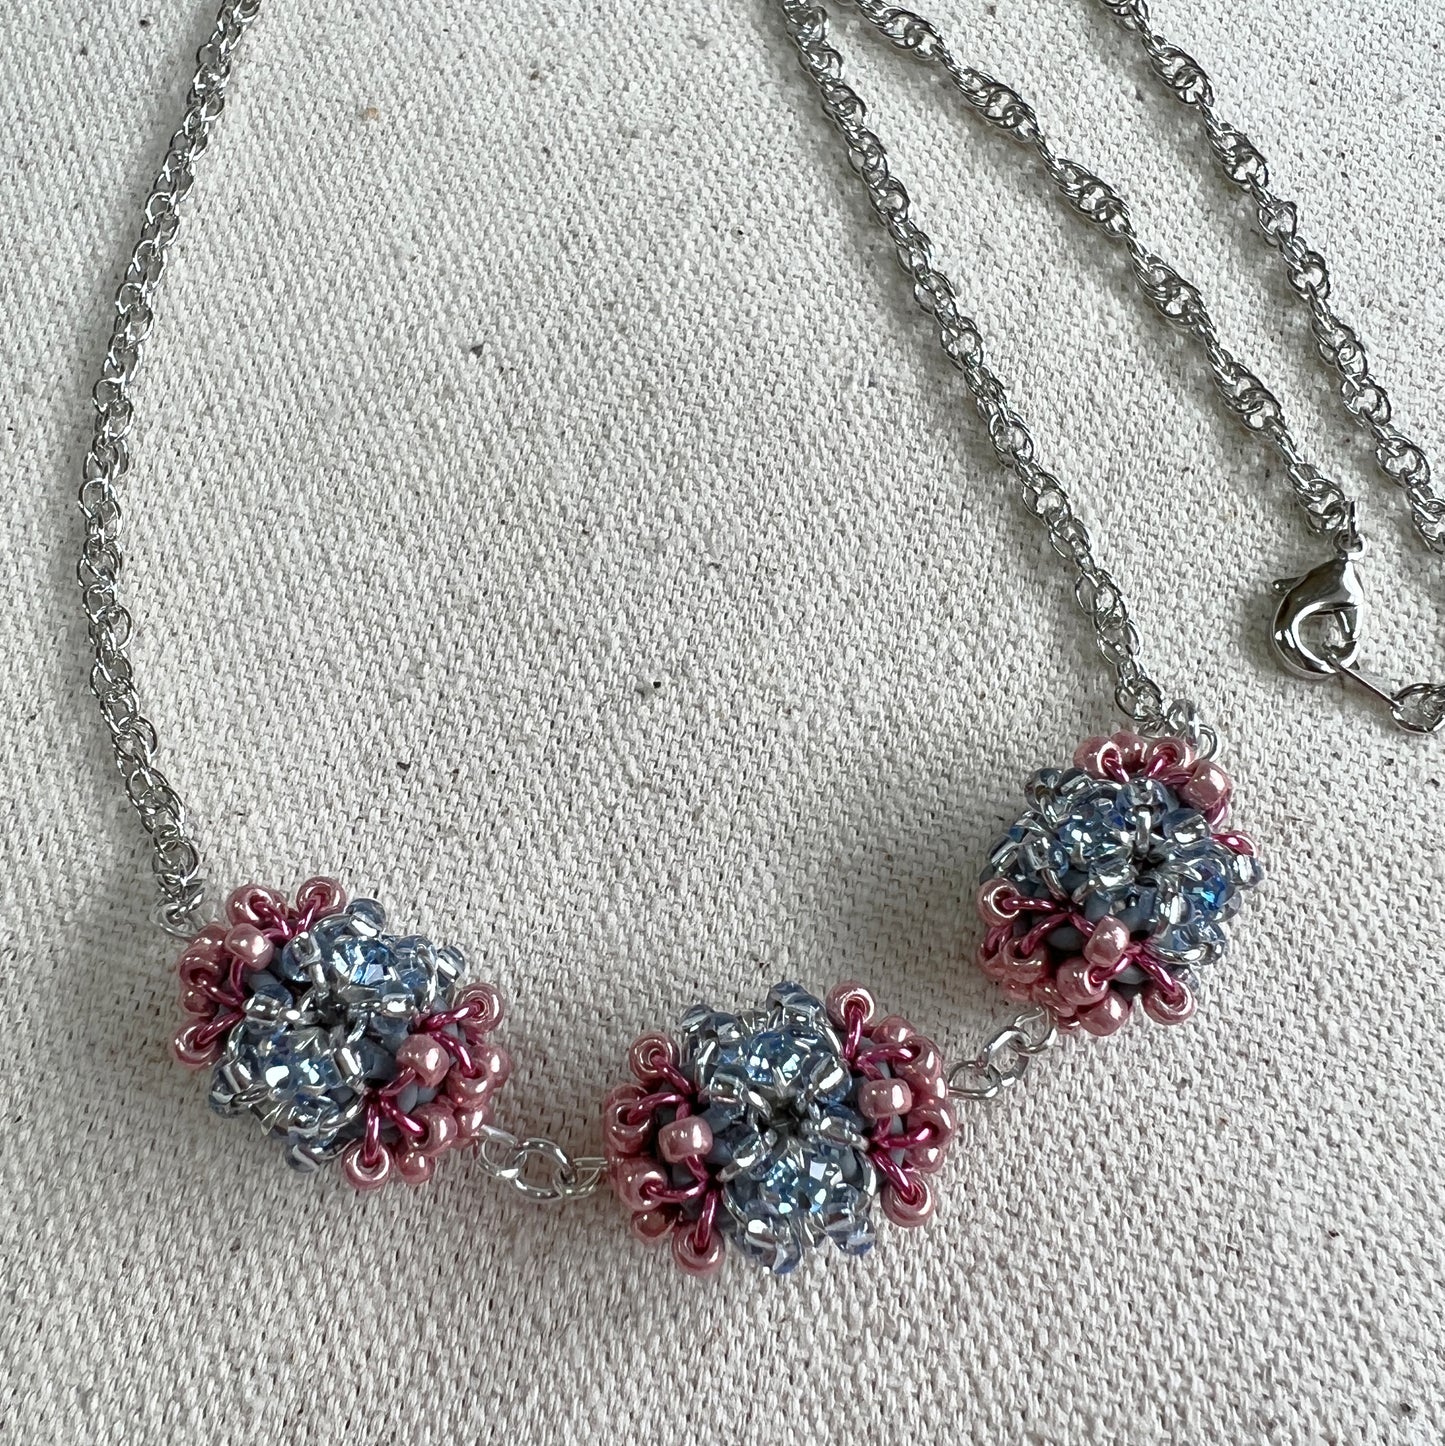 Beaded Rhinestone Bead Necklace - Light Sapphire and Coral